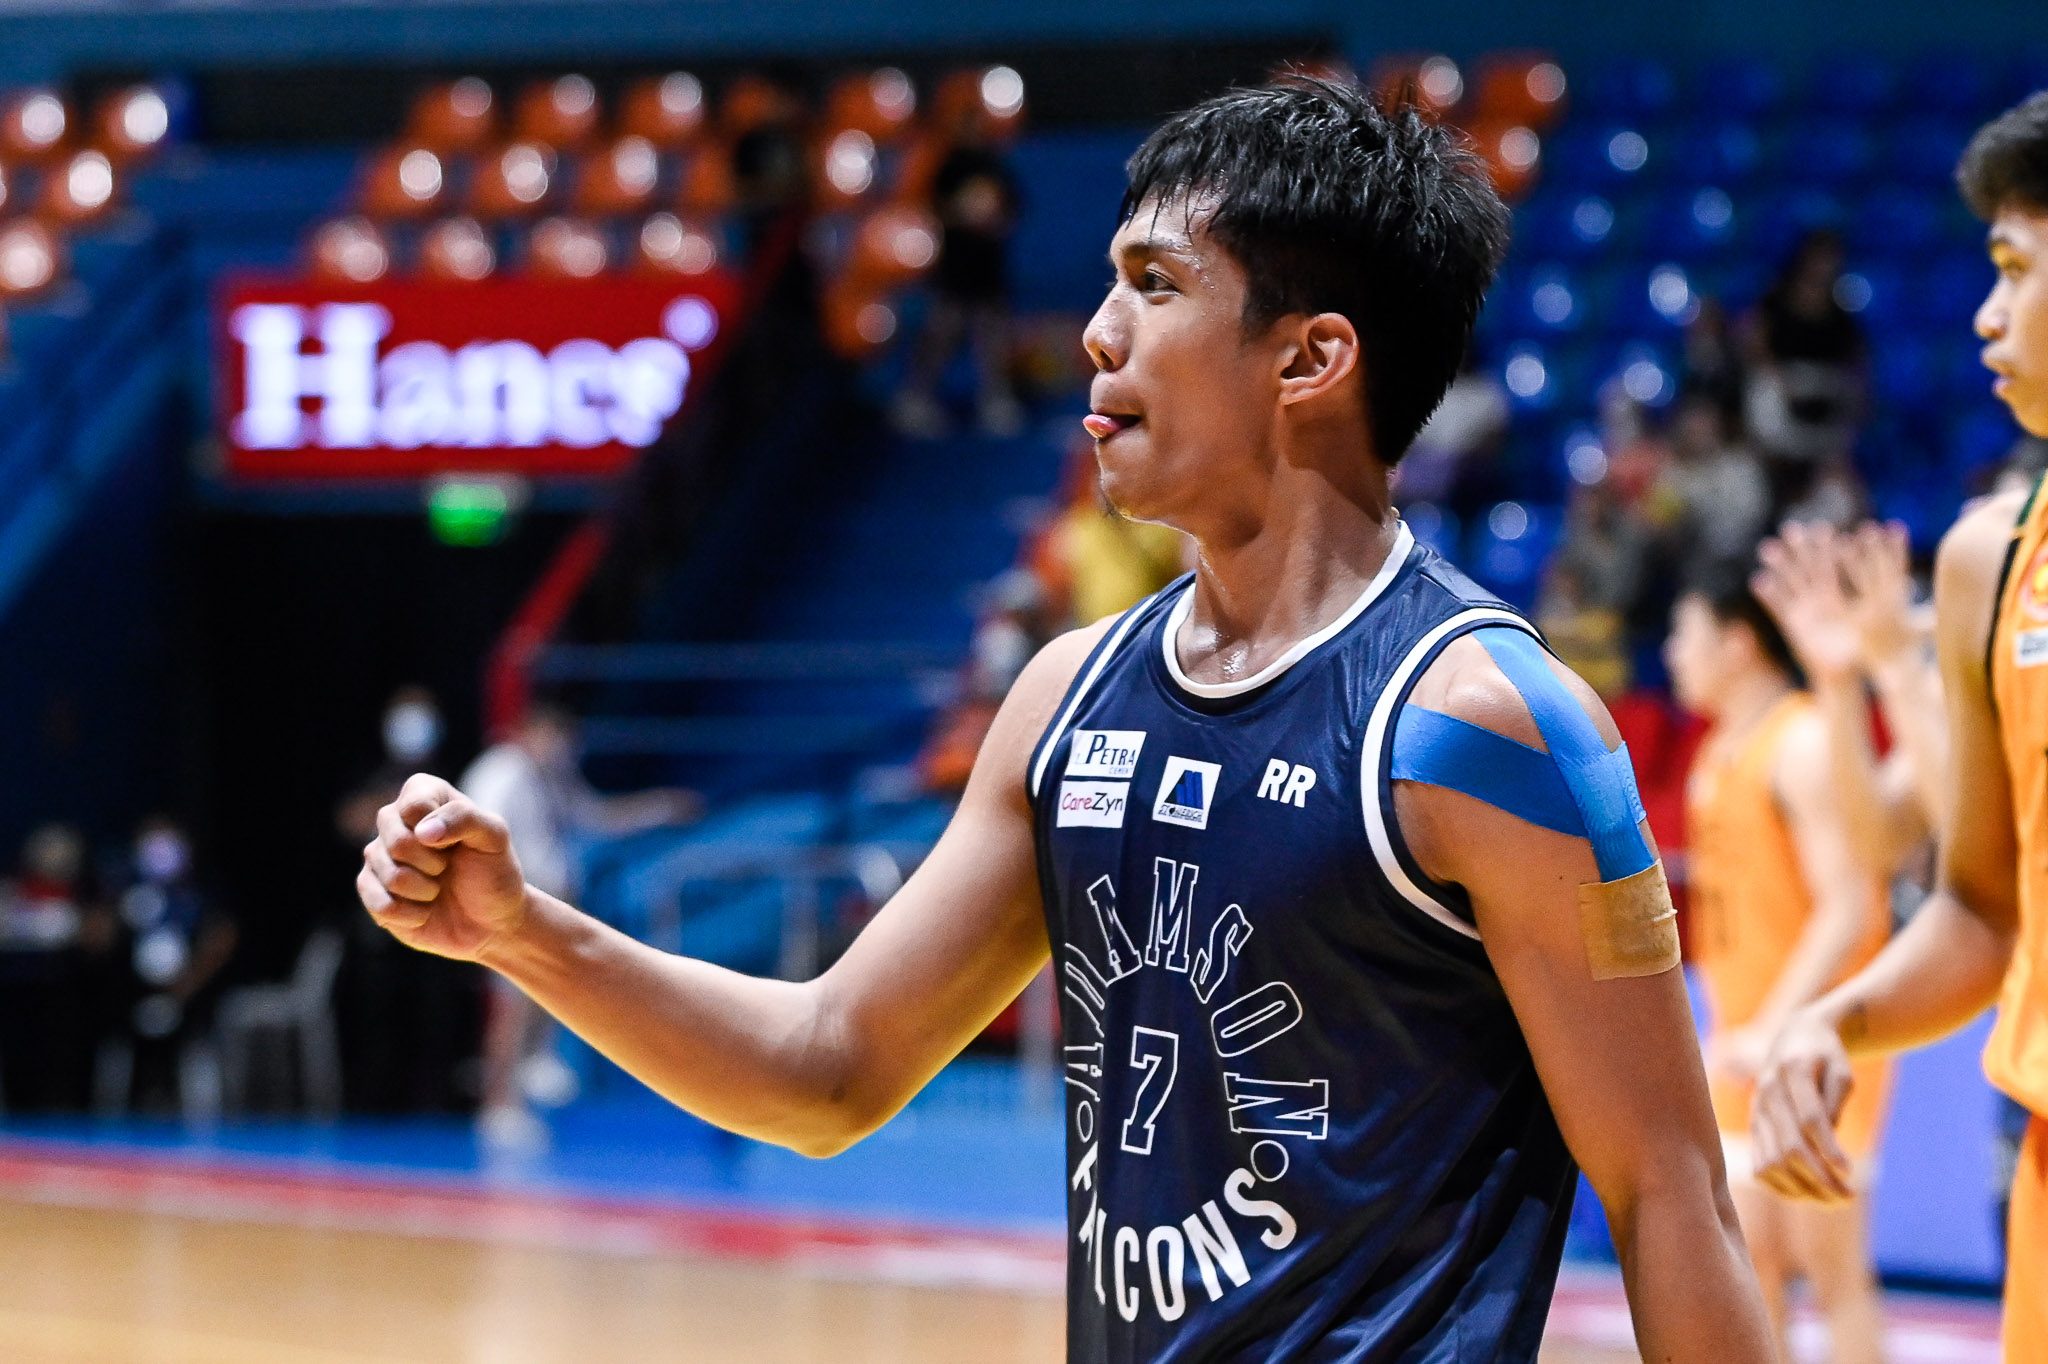 NU, Adamson stay on top as UAAP boys’ basketball 2nd round starts